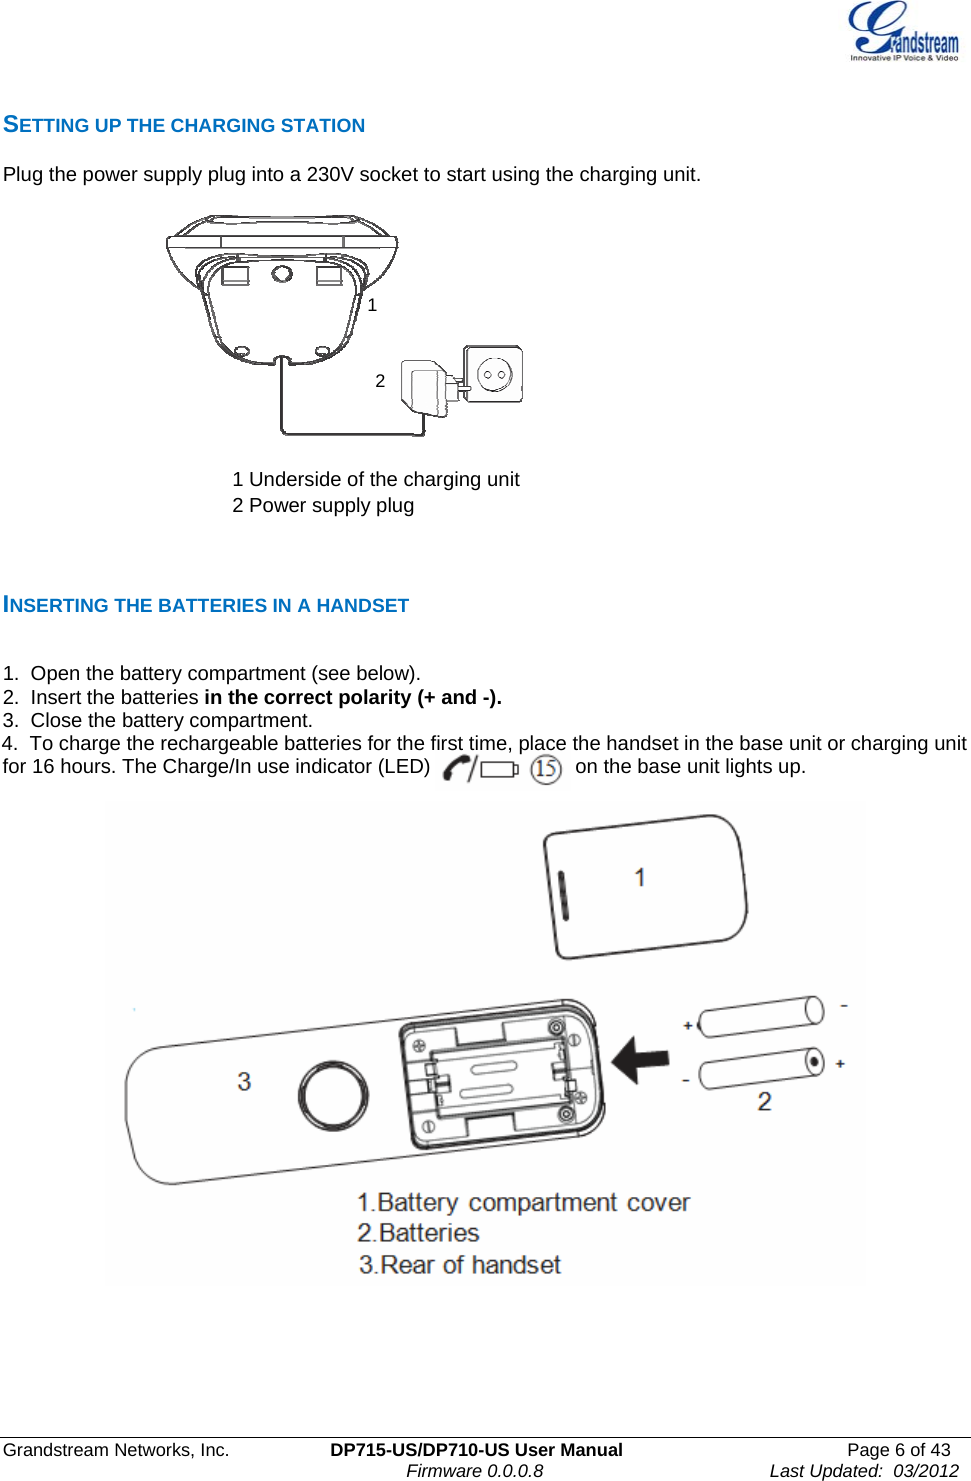  Grandstream Networks, Inc.  DP715-US/DP710-US User Manual  Page 6 of 43                                                                               Firmware 0.0.0.8                                     Last Updated:  03/2012 SETTING UP THE CHARGING STATION  Plug the power supply plug into a 230V socket to start using the charging unit.       1         2    1 Underside of the charging unit 2 Power supply plug      INSERTING THE BATTERIES IN A HANDSET  1.  Open the battery compartment (see below). 2.  Insert the batteries in the correct polarity (+ and -). 3.  Close the battery compartment. 4.  To charge the rechargeable batteries for the first time, place the handset in the base unit or charging unit for 16 hours. The Charge/In use indicator (LED)                          on the base unit lights up.         